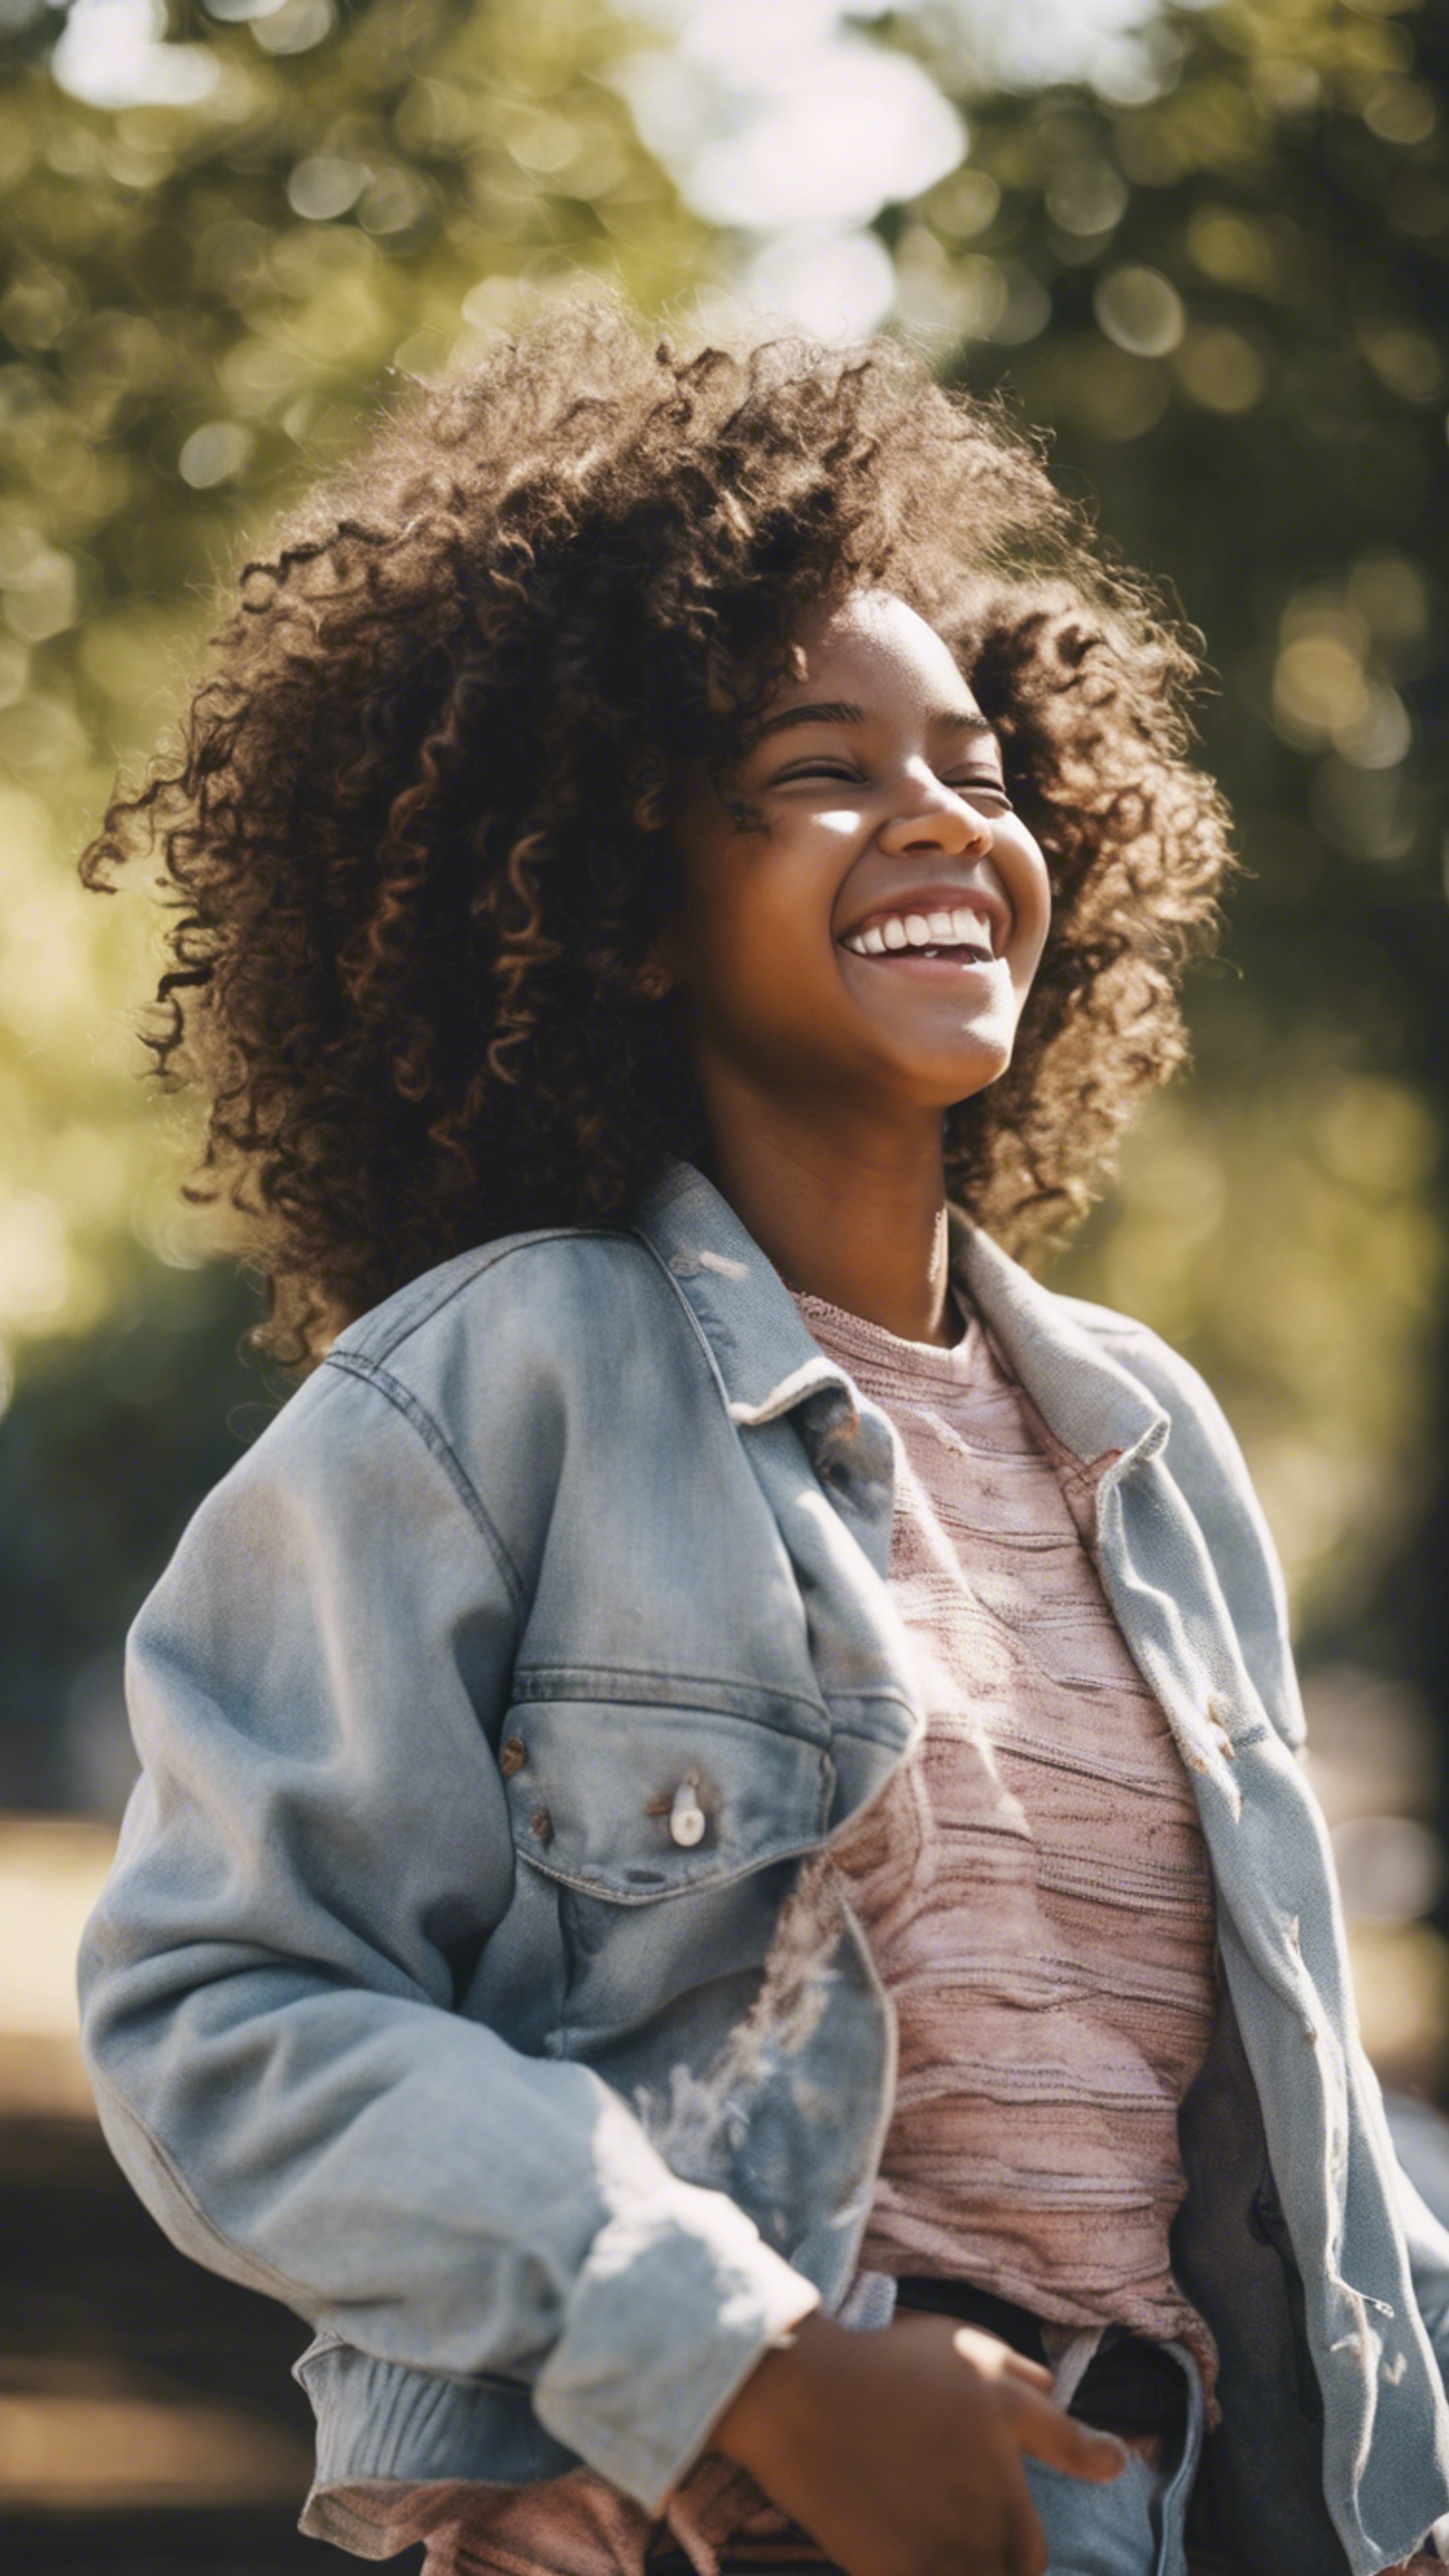 A confident young black girl with big, curly hair laughing while playing in a city park during a sunny afternoon. Wallpaper[a9bacc30abb04d56bfae]